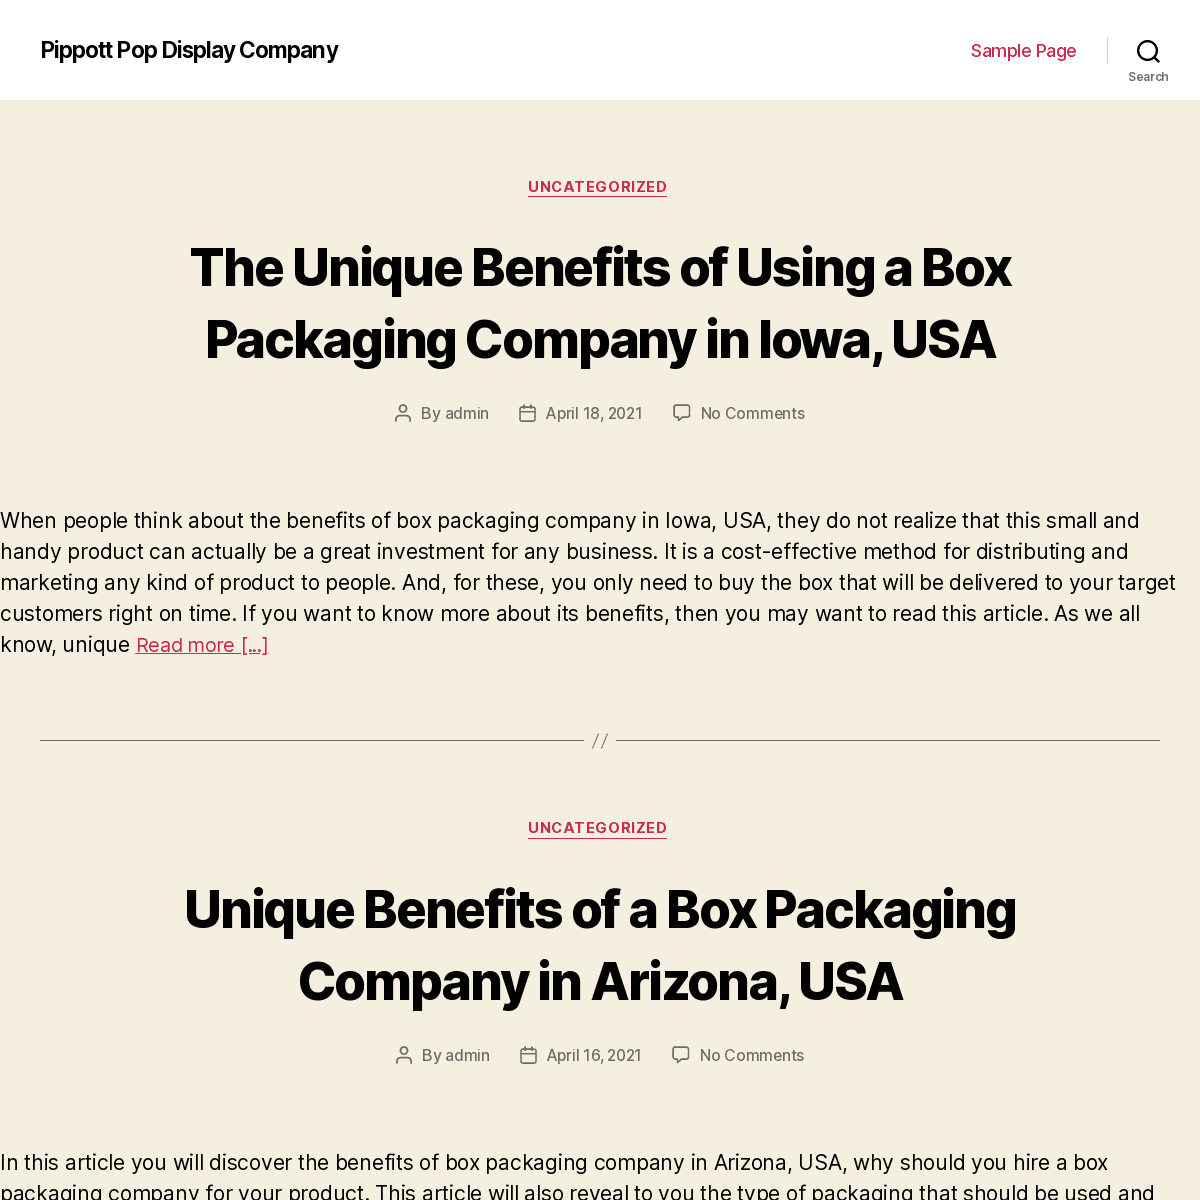 A complete backup of https://popdisplaycompany.com